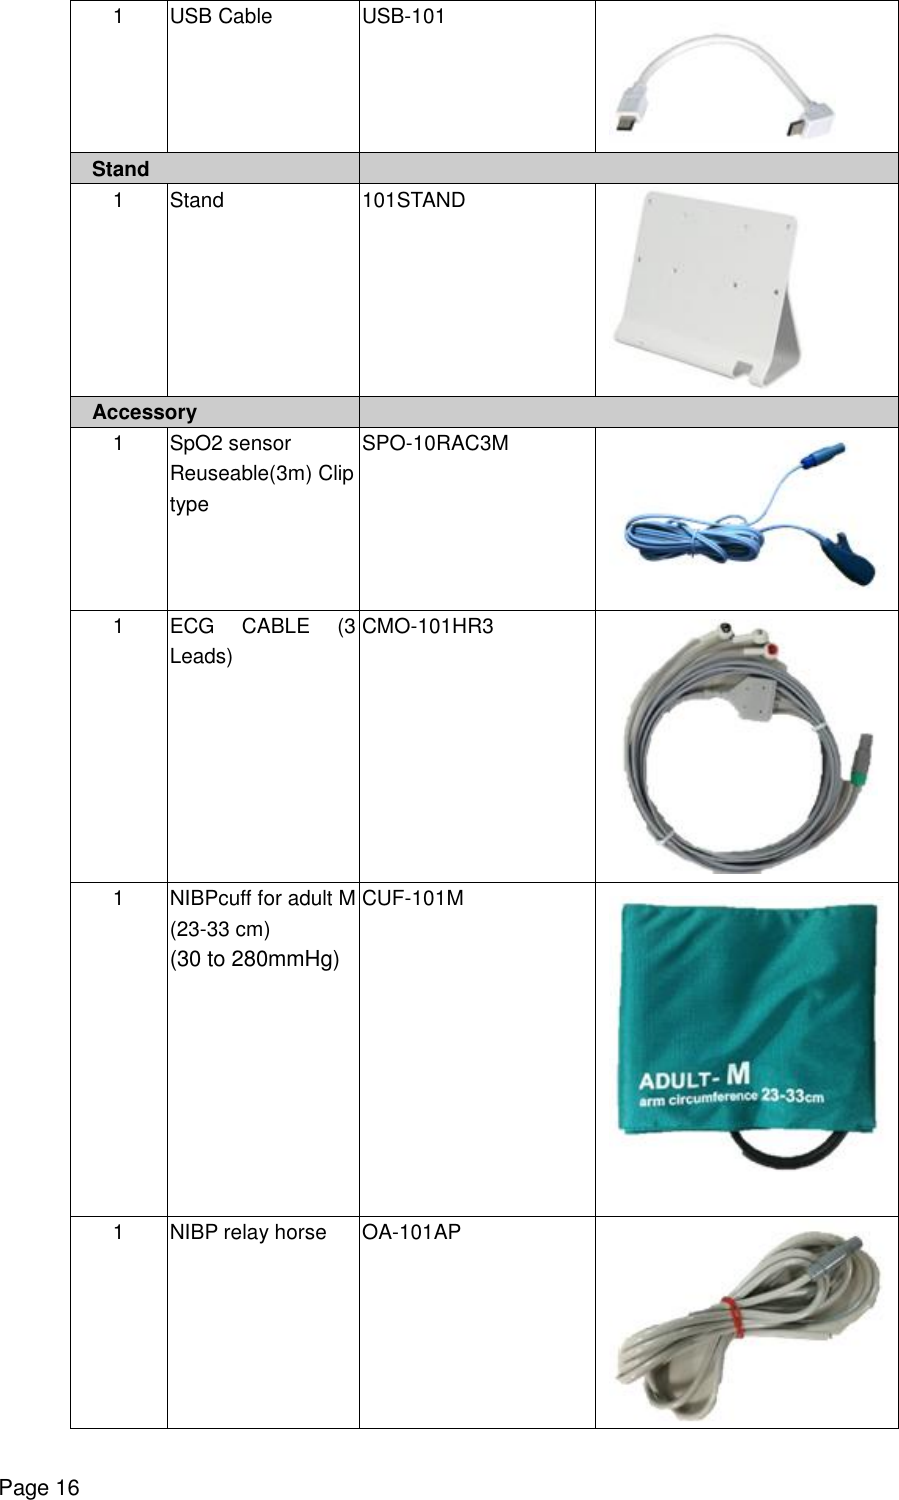    Page 16 1  USB Cable  USB-101  Stand   1  Stand  101STAND  Accessory   1  SpO2 sensor Reuseable(3m) Clip type SPO-10RAC3M  1 ECG CABLE (3 Leads) CMO-101HR3  1  NIBPcuff for adult M (23-33 cm) (30 to 280mmHg) CUF-101M  1  NIBP relay horse OA-101AP  